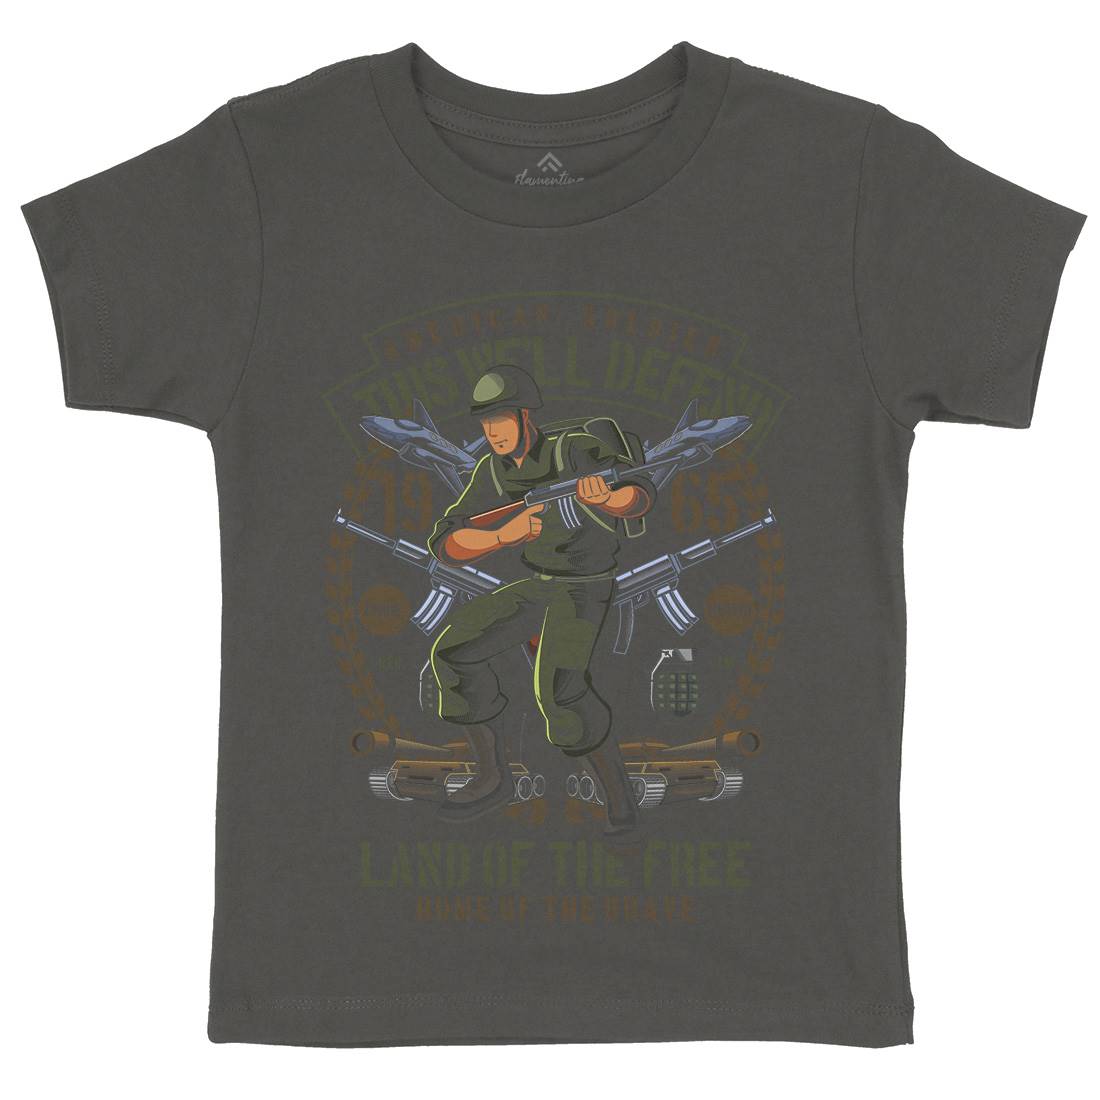 American Soldier Kids Crew Neck T-Shirt Army C304